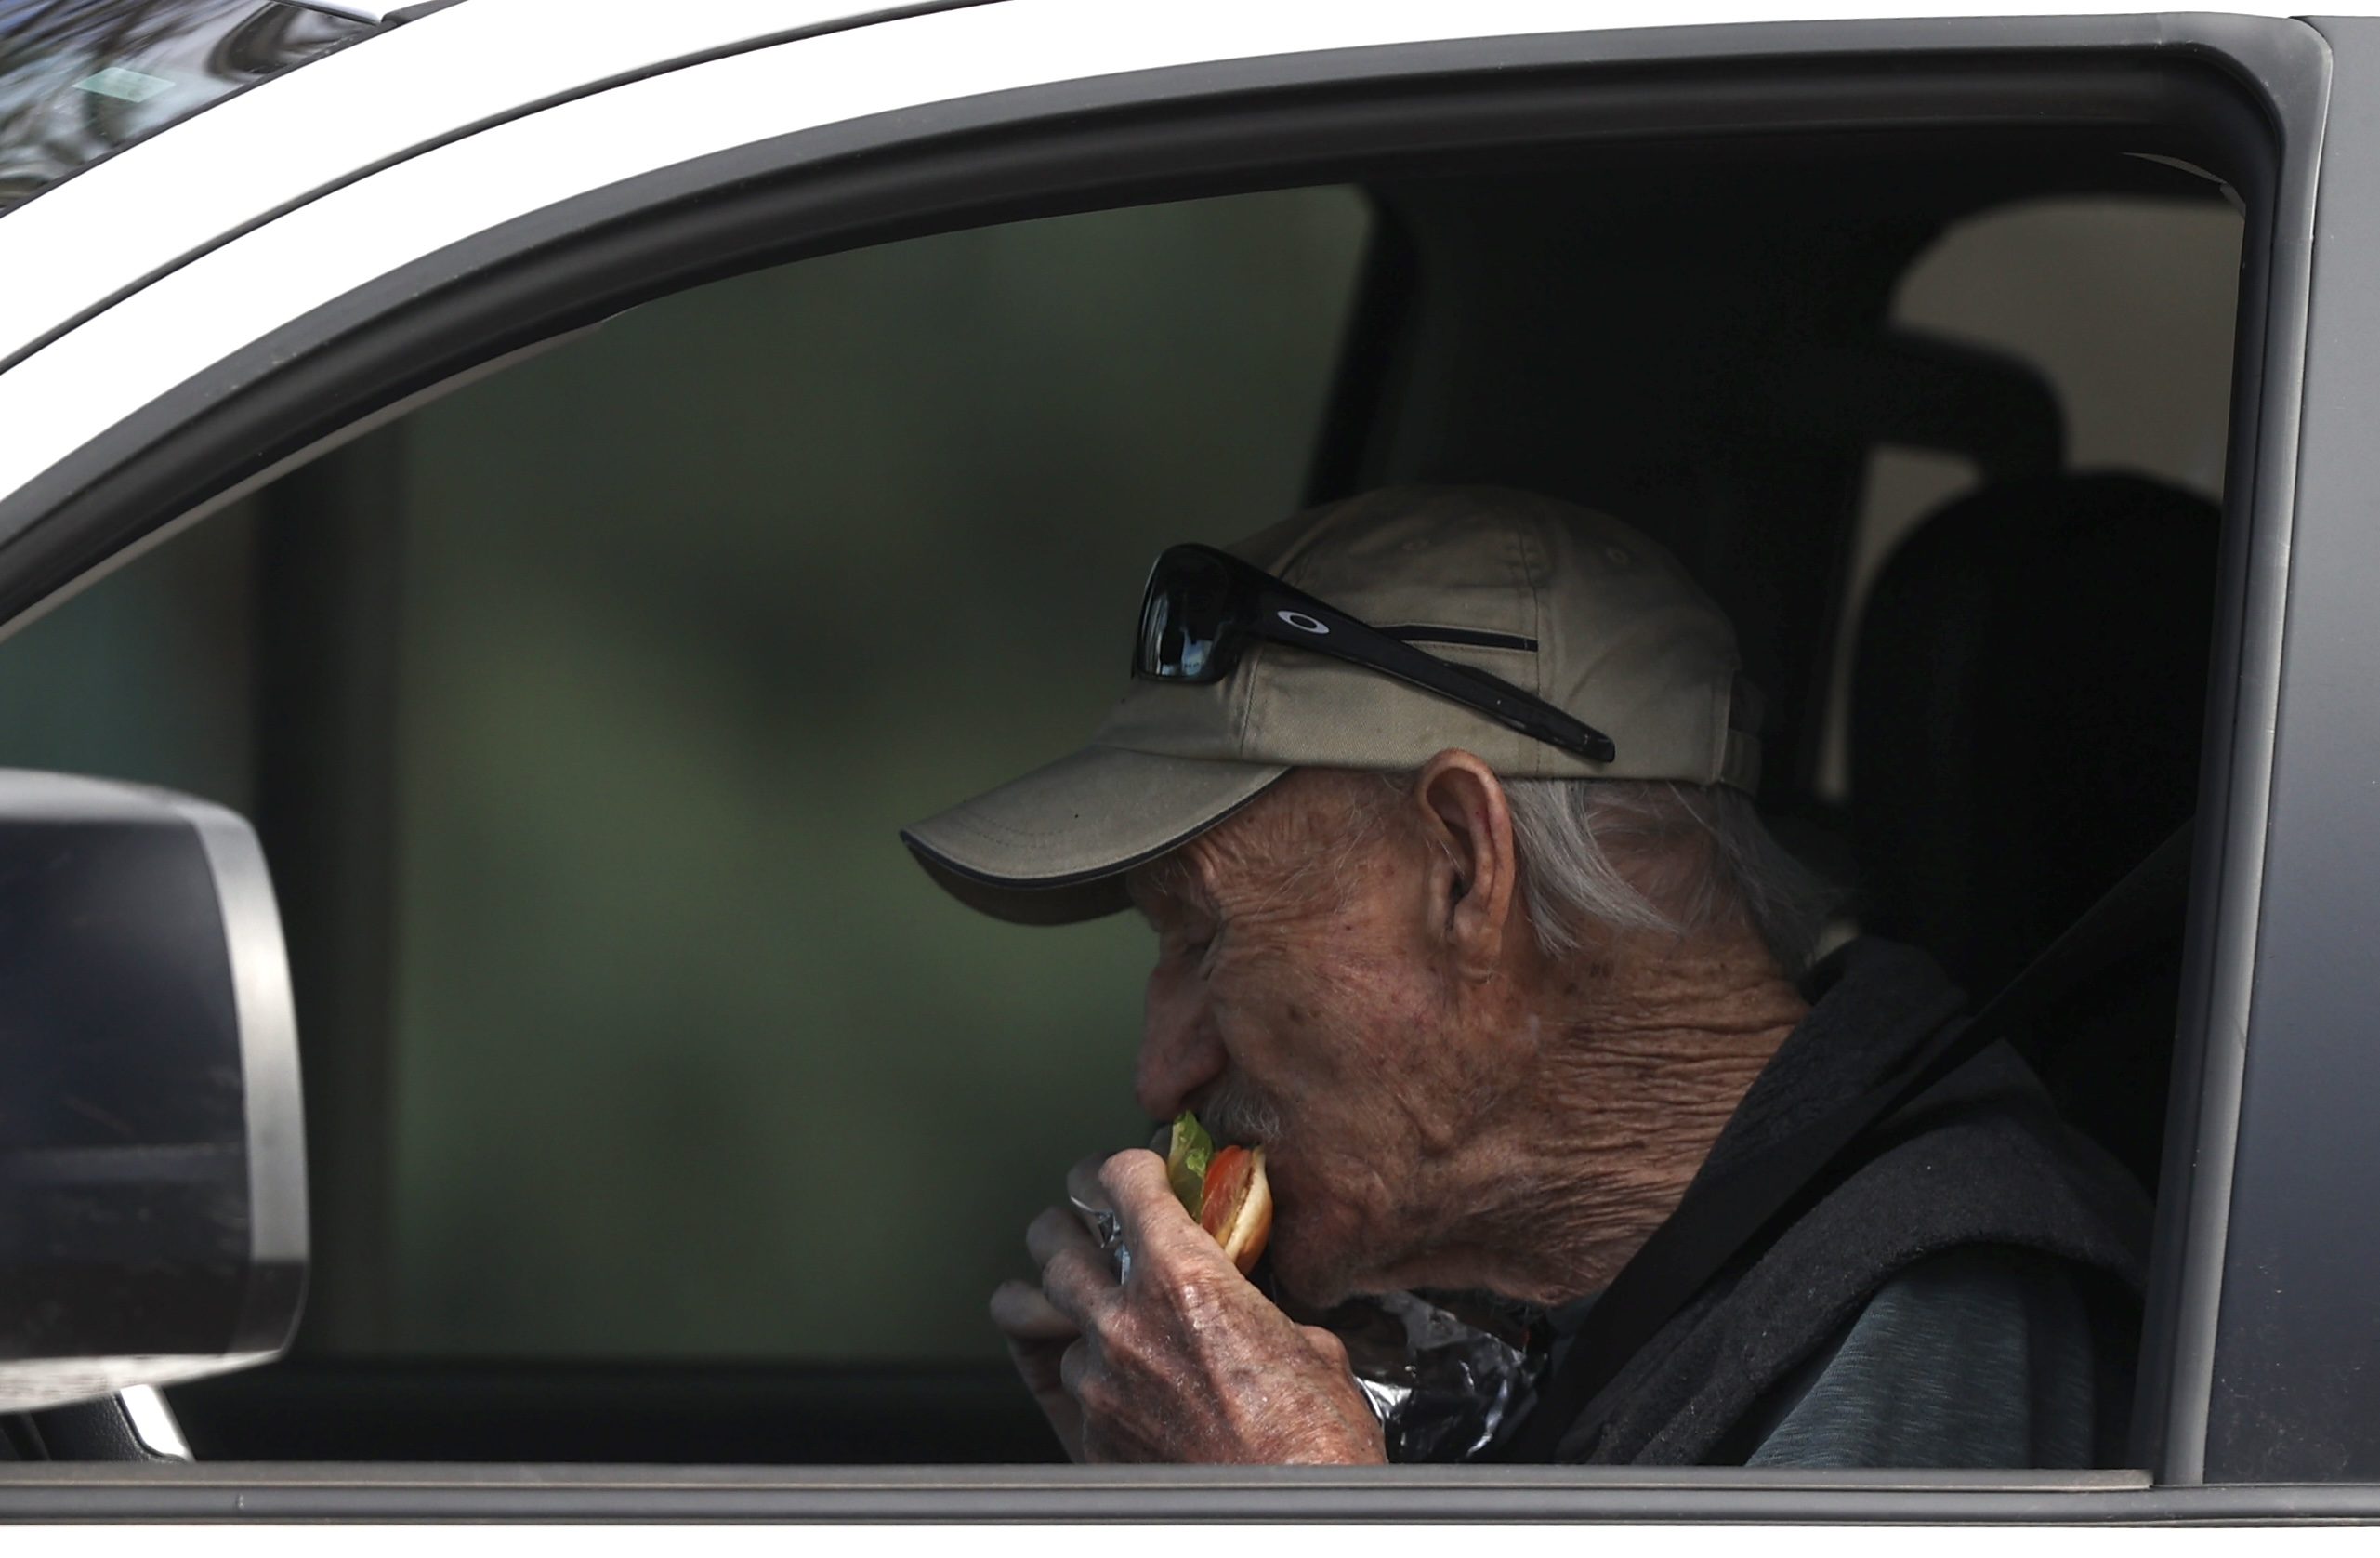 The star chowed down on a chicken sandwich in the Wendy's parking lot. 